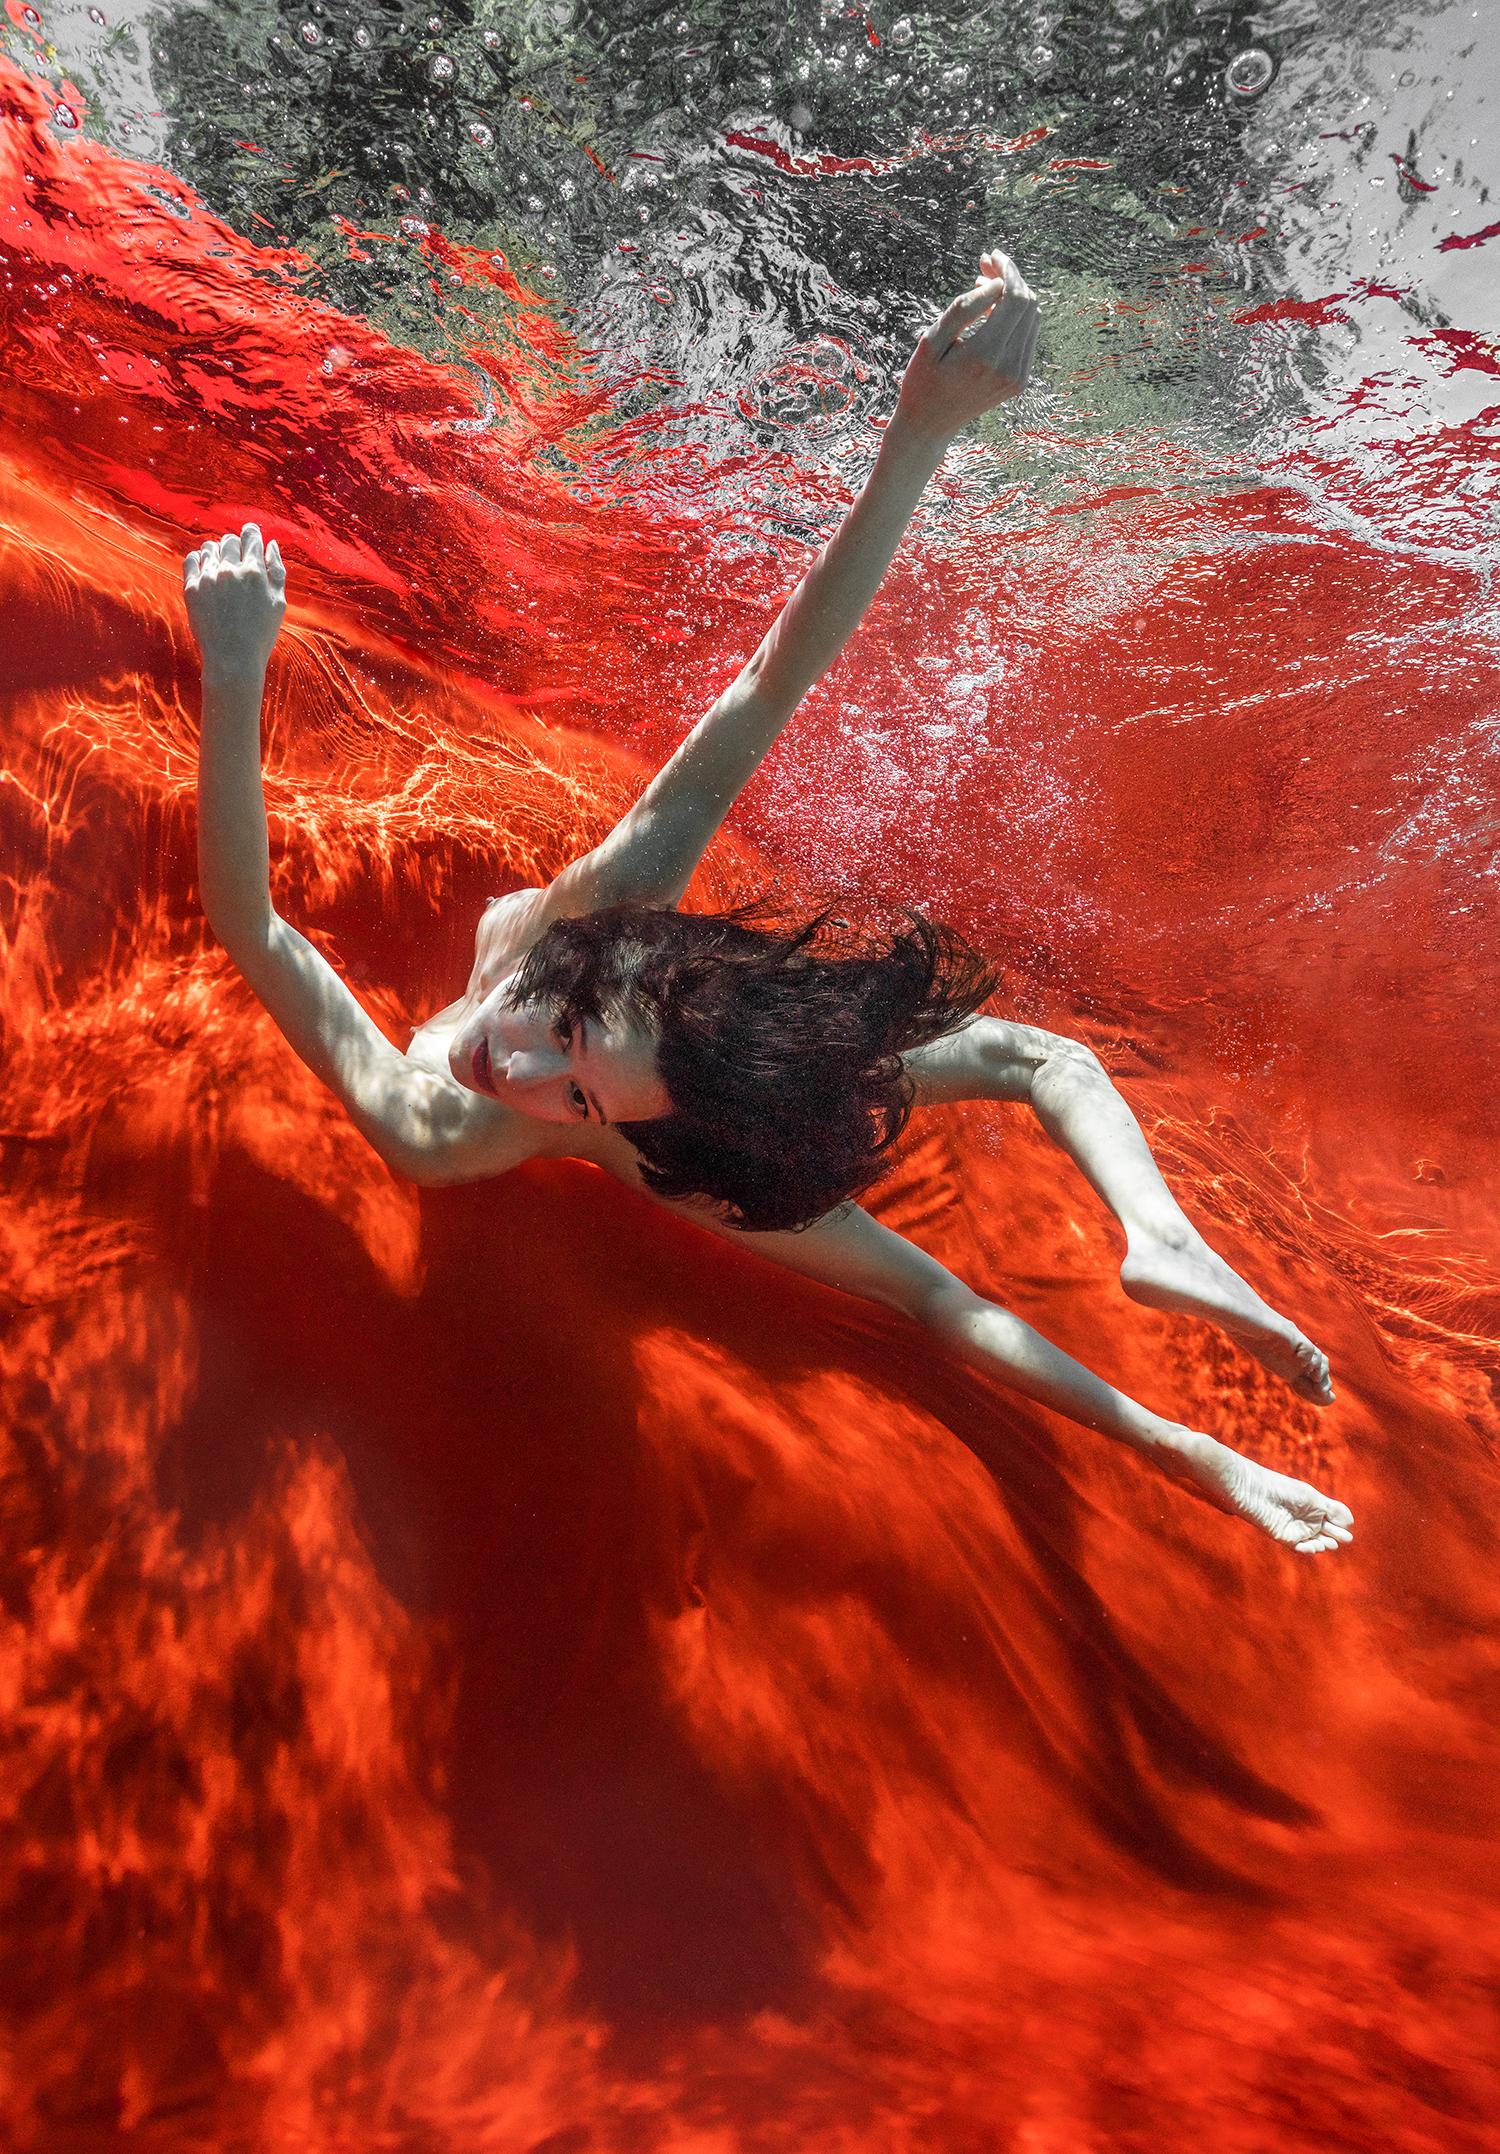 Alex Sher Nude Photograph - Wild Blood  - underwater nude photograph - archival pigment print 24x18"